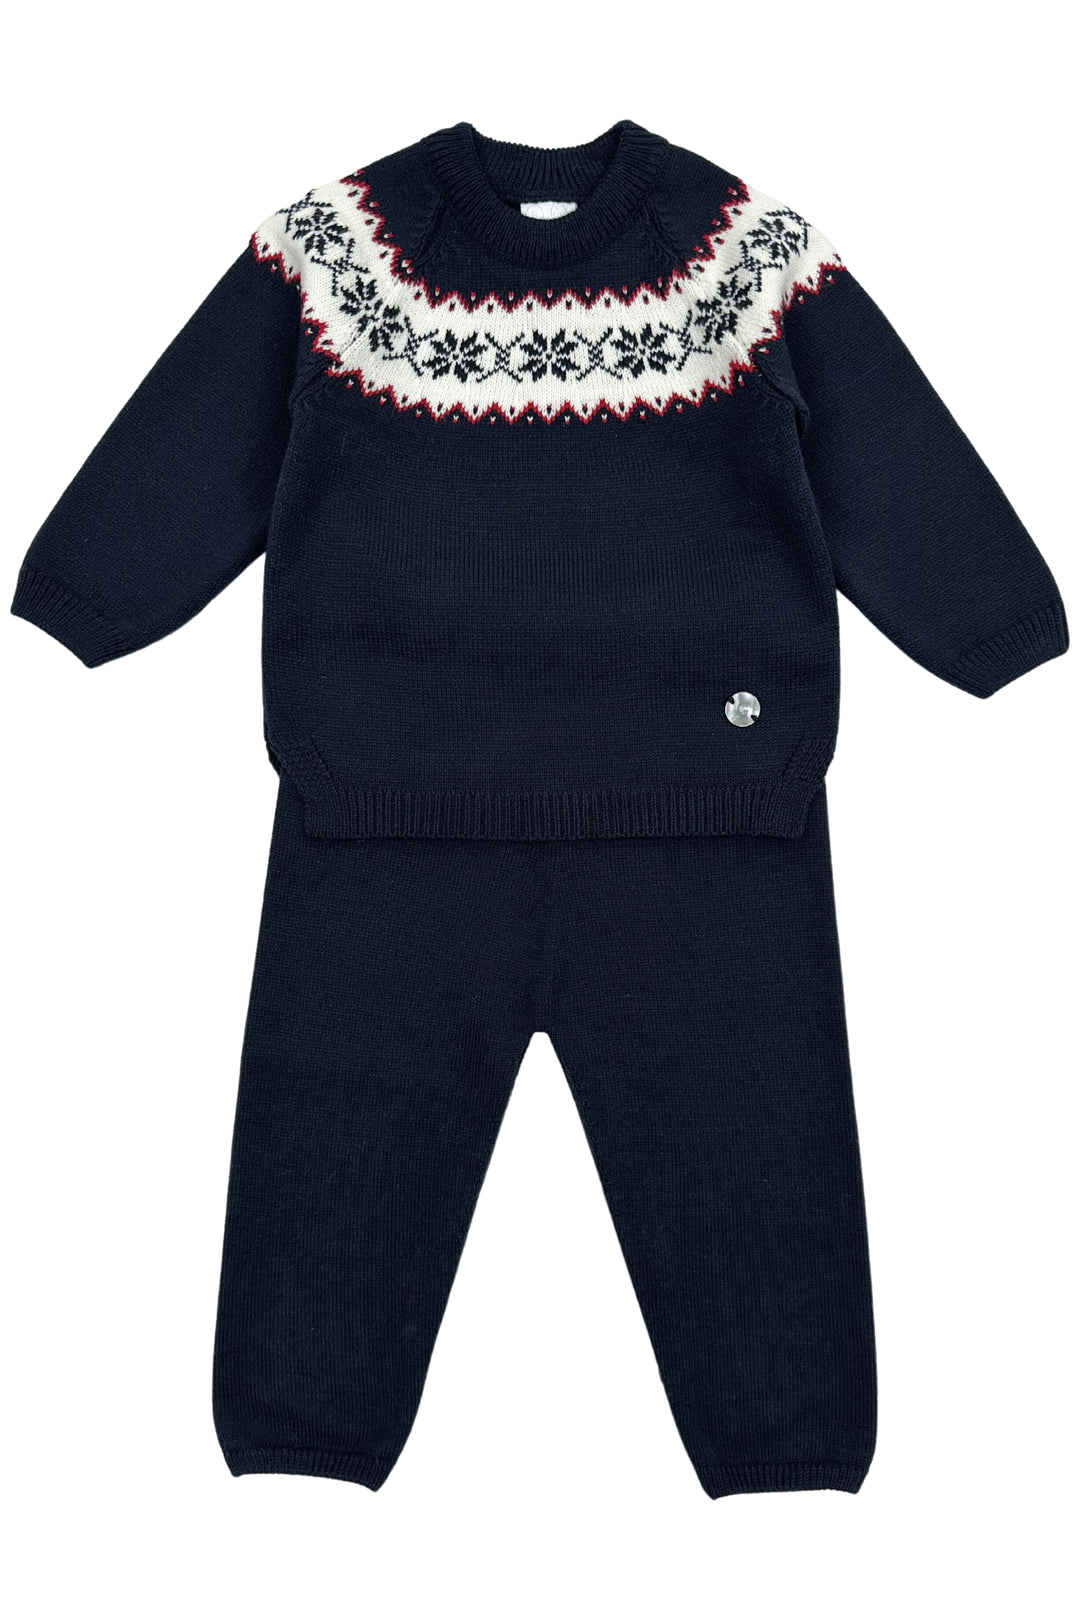 Granlei "Silas" Navy Knitted Tracksuit | Millie and John